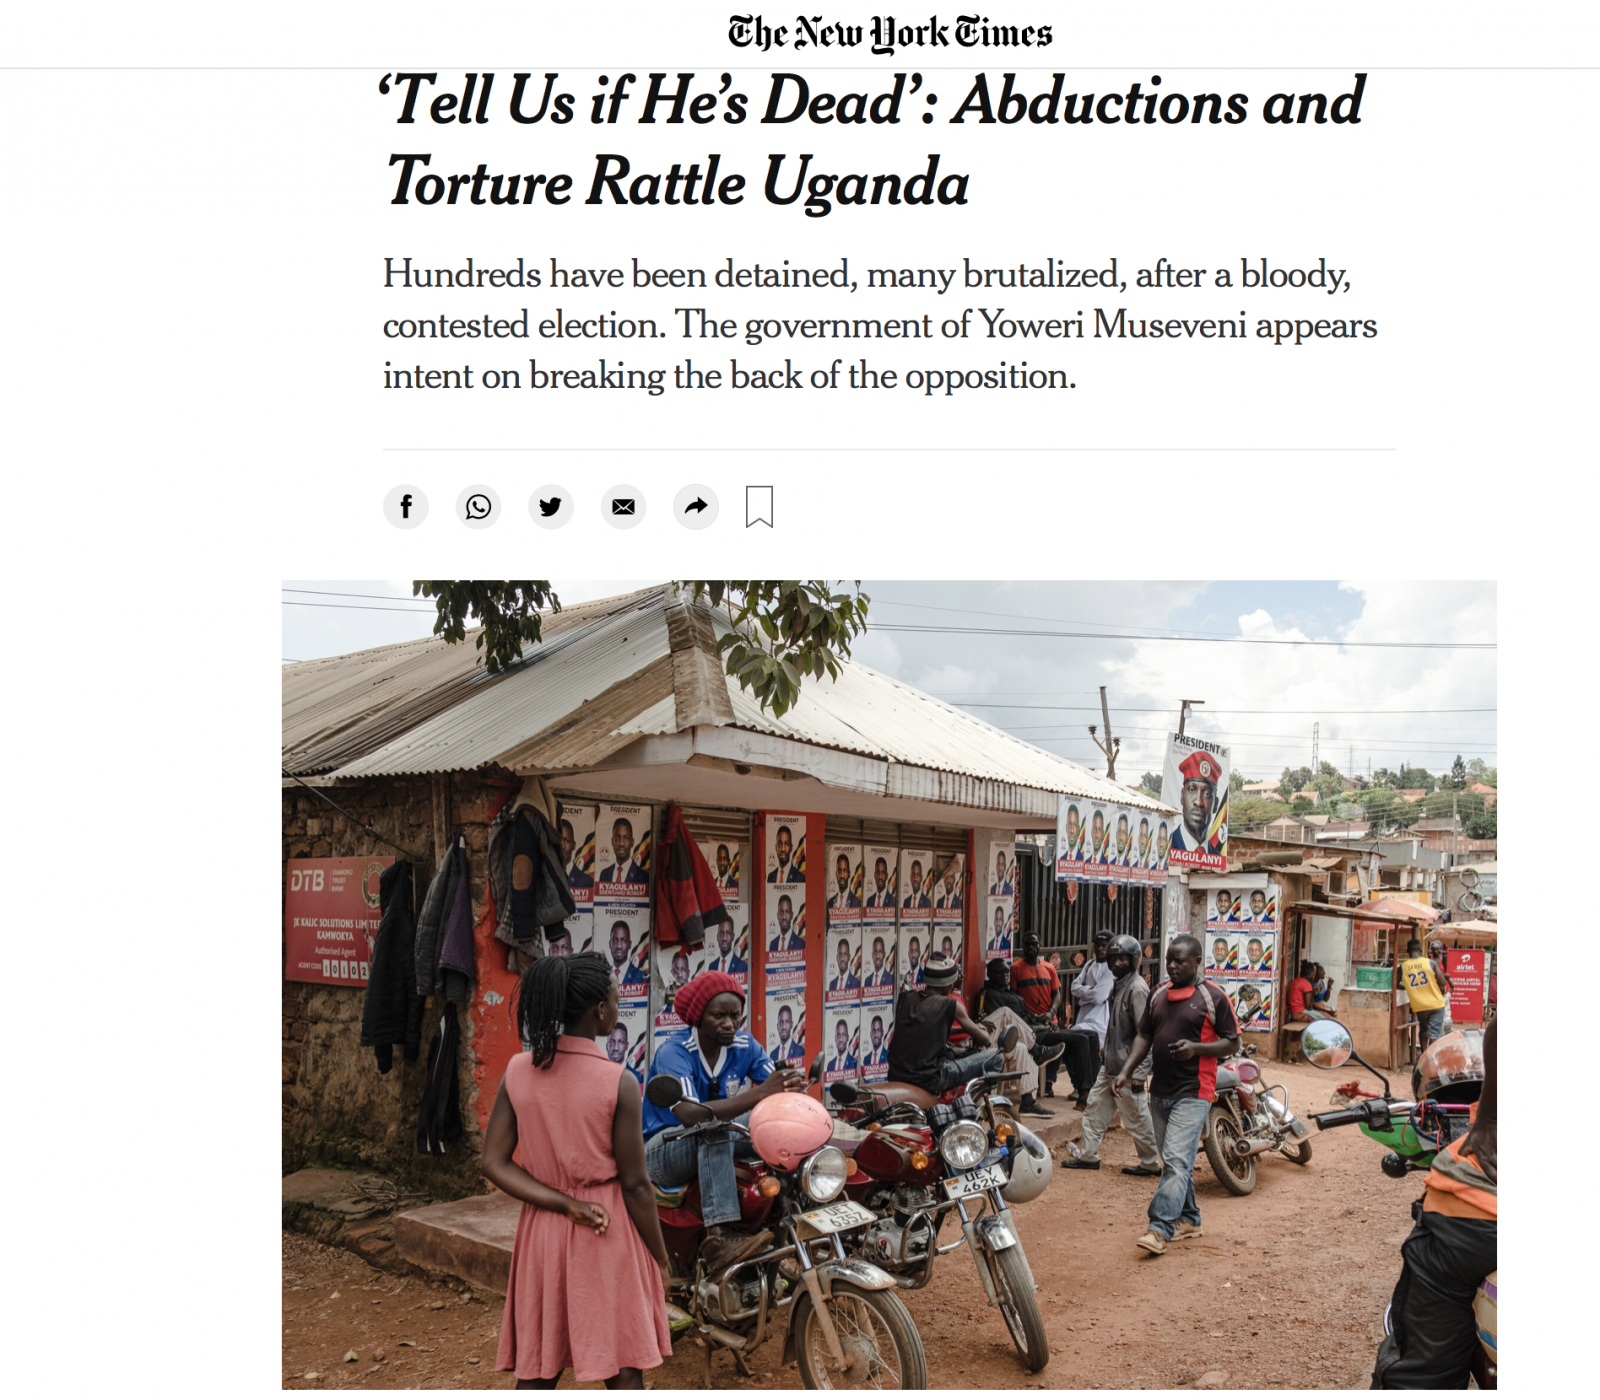 Thumbnail of For The New York Times